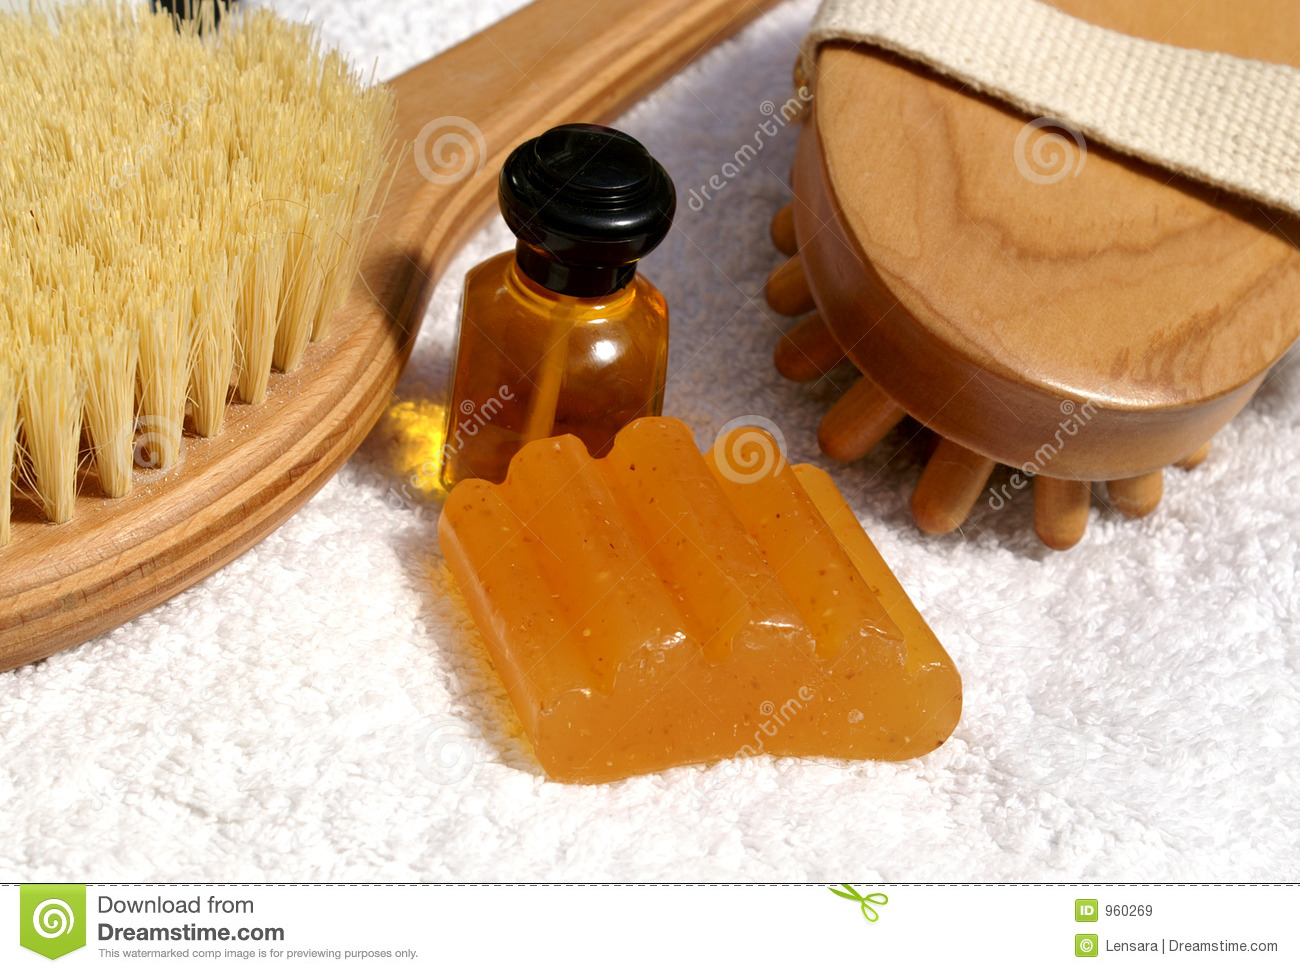 Items Used In Pampering And Spa Treatments